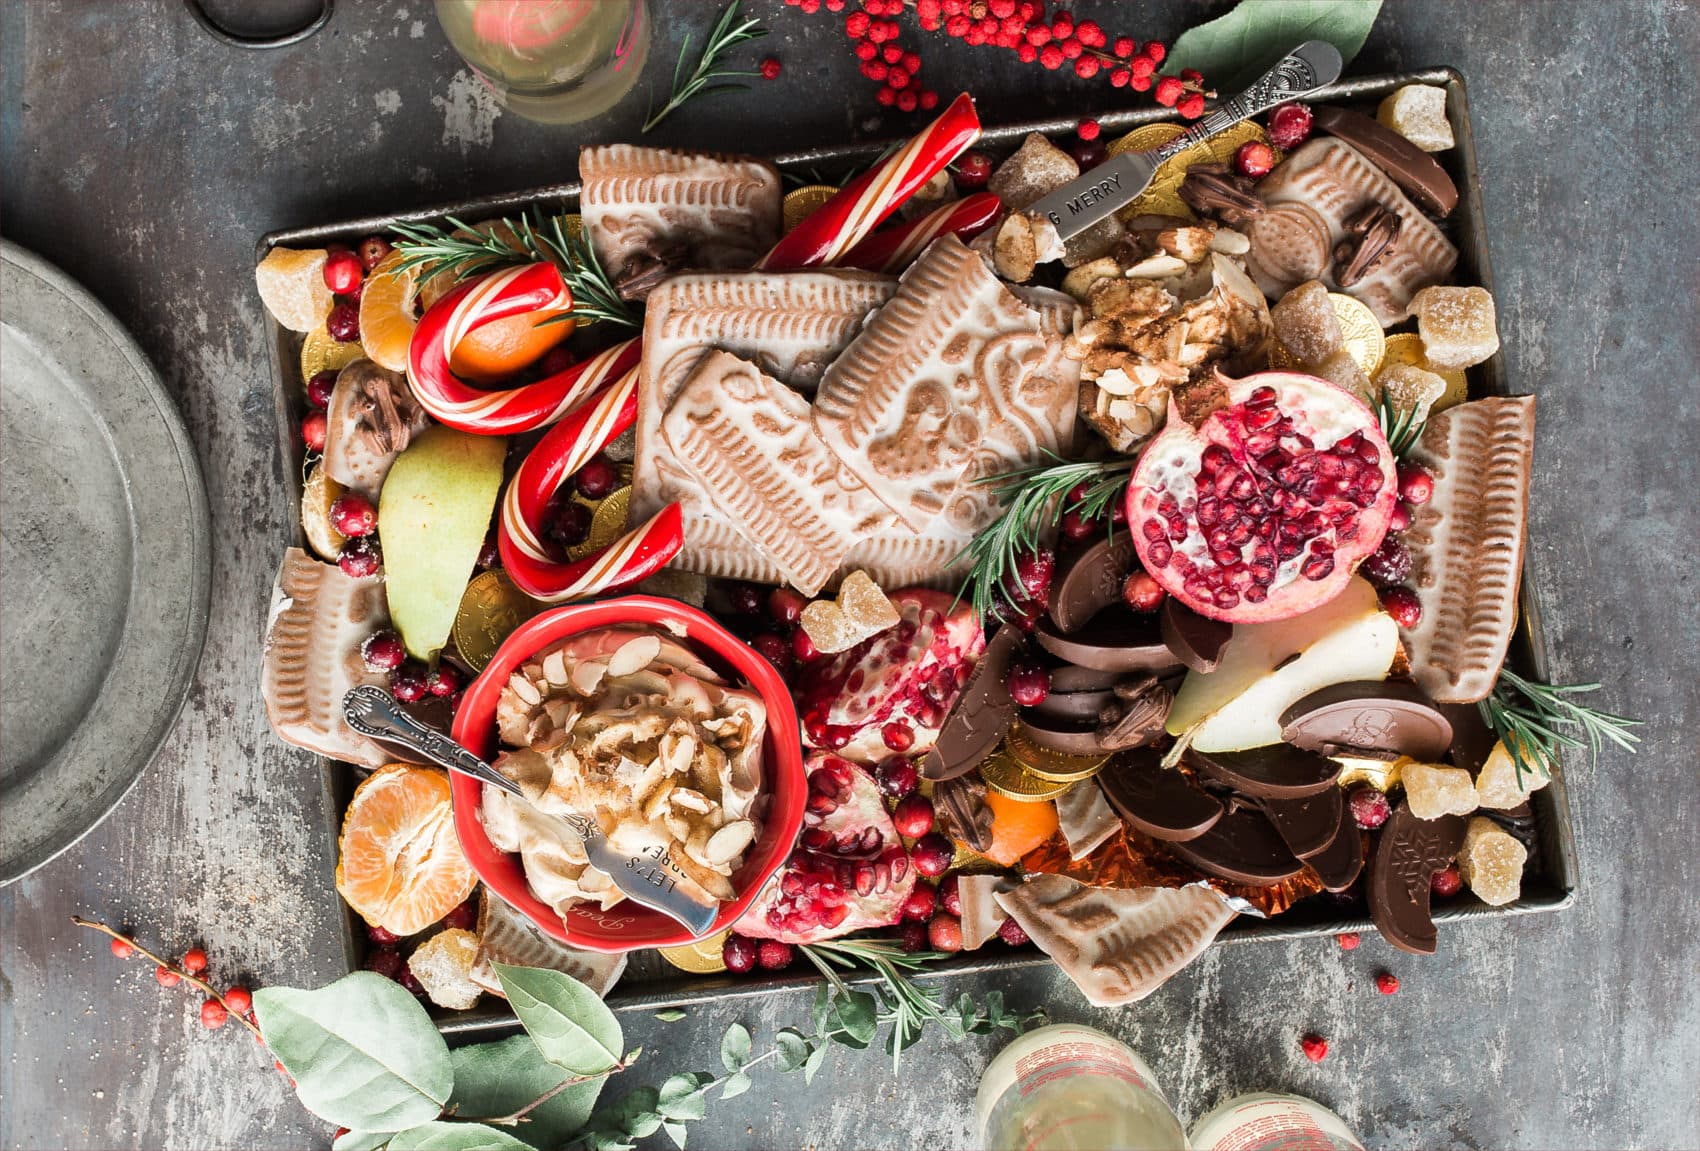 A platter of goodies for a holiday meal. (Courtesy Brooke Lark/Unsplash)